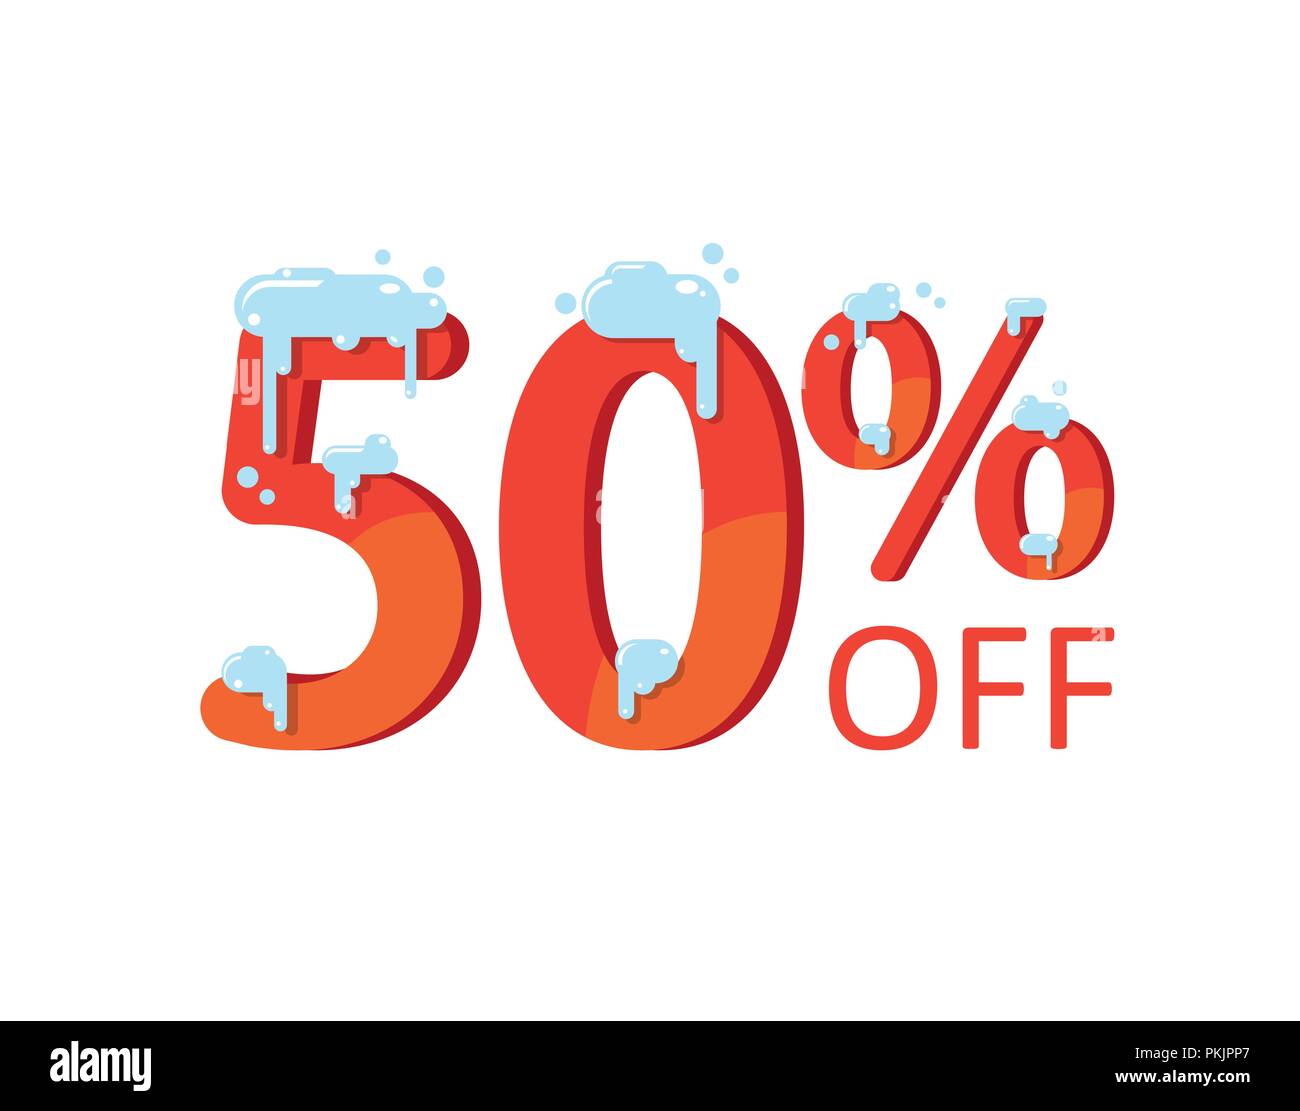 https://c8.alamy.com/comp/PKJPP7/50-off-a-discount-of-fifty-percent-numbers-in-the-snow-winter-sale-christmas-sale-holiday-sale-flat-vector-illustration-PKJPP7.jpg